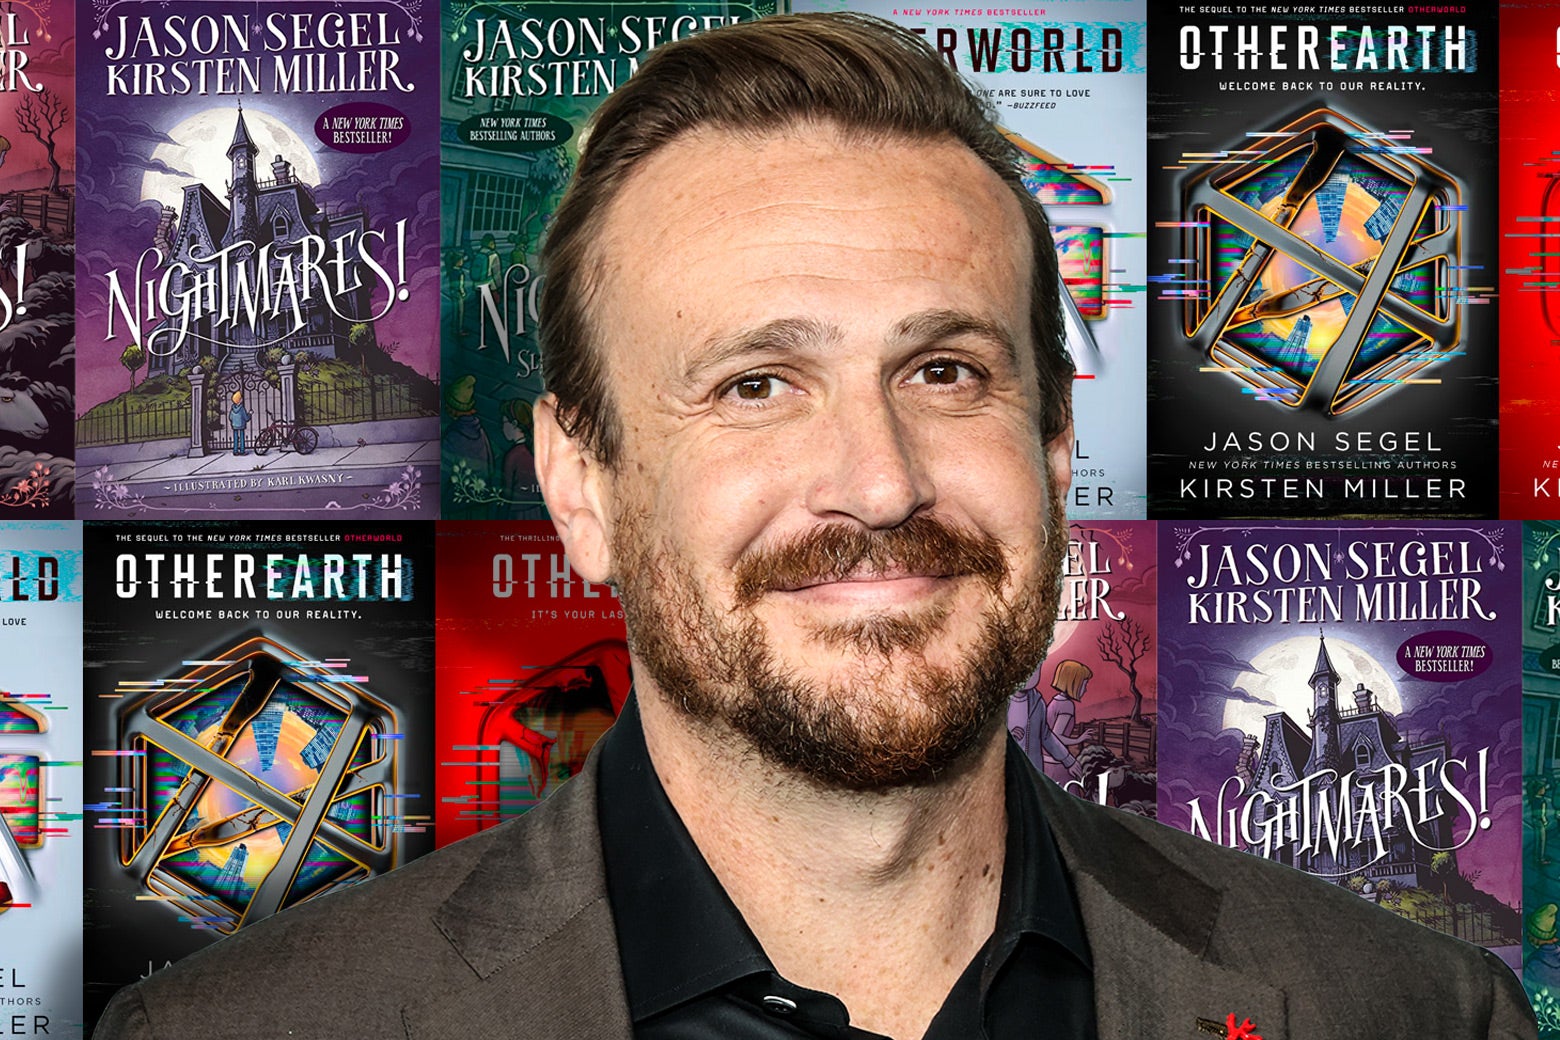 Jason Segel in front of a collage of the covers of books he's co-authored.